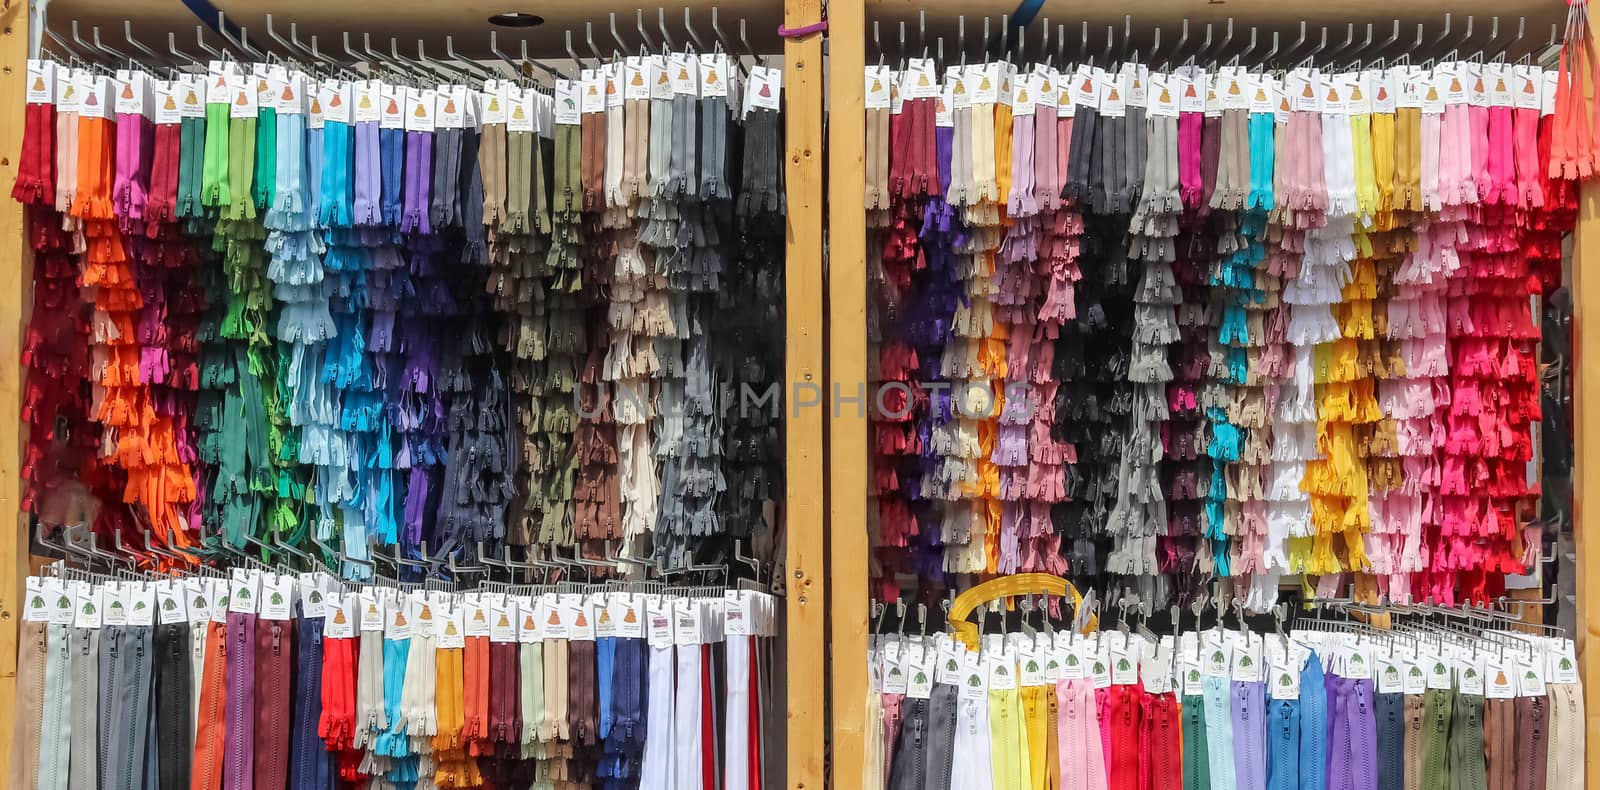 Detailed close up view on samples of zippers in different colors found at a fabrics market.